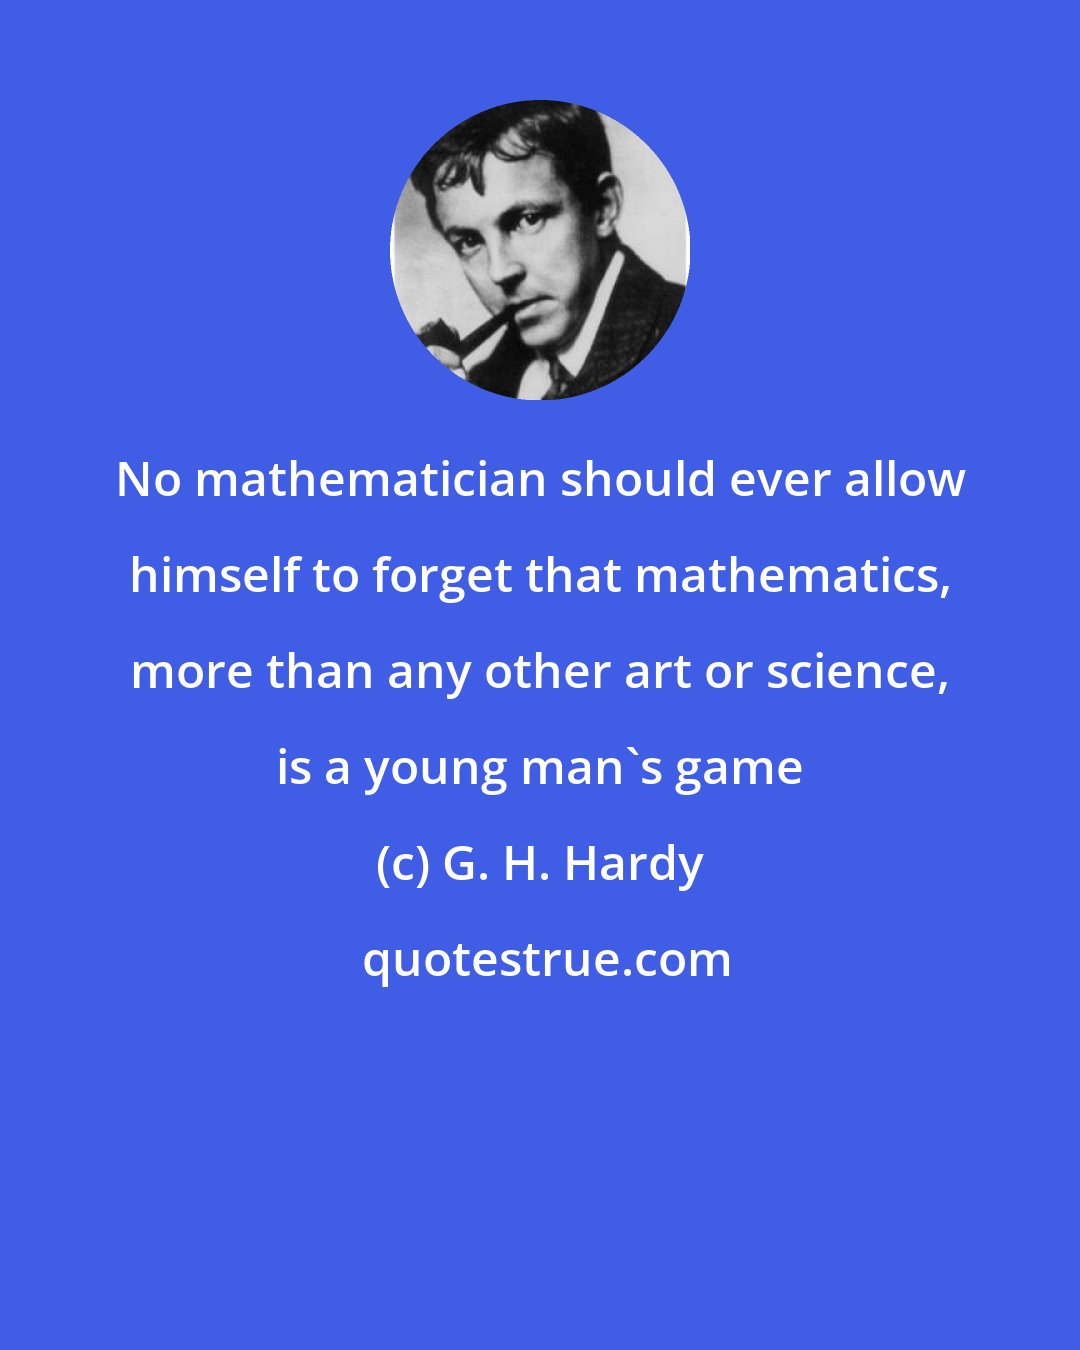 G. H. Hardy: No mathematician should ever allow himself to forget that mathematics, more than any other art or science, is a young man's game